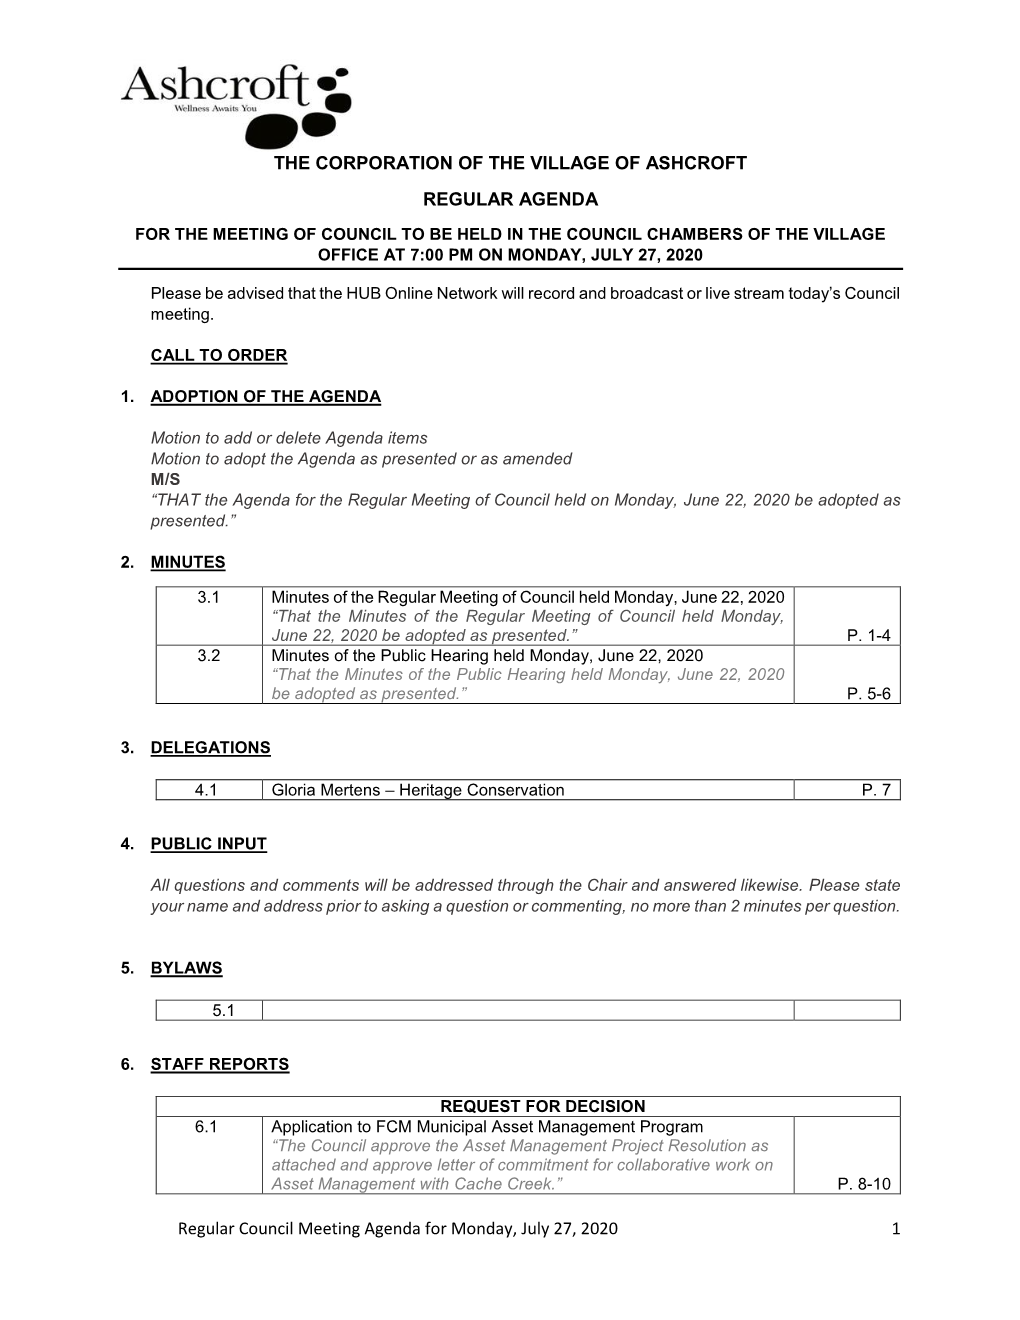 Regular Council Meeting Agenda for Monday, July 27, 2020 1 THE